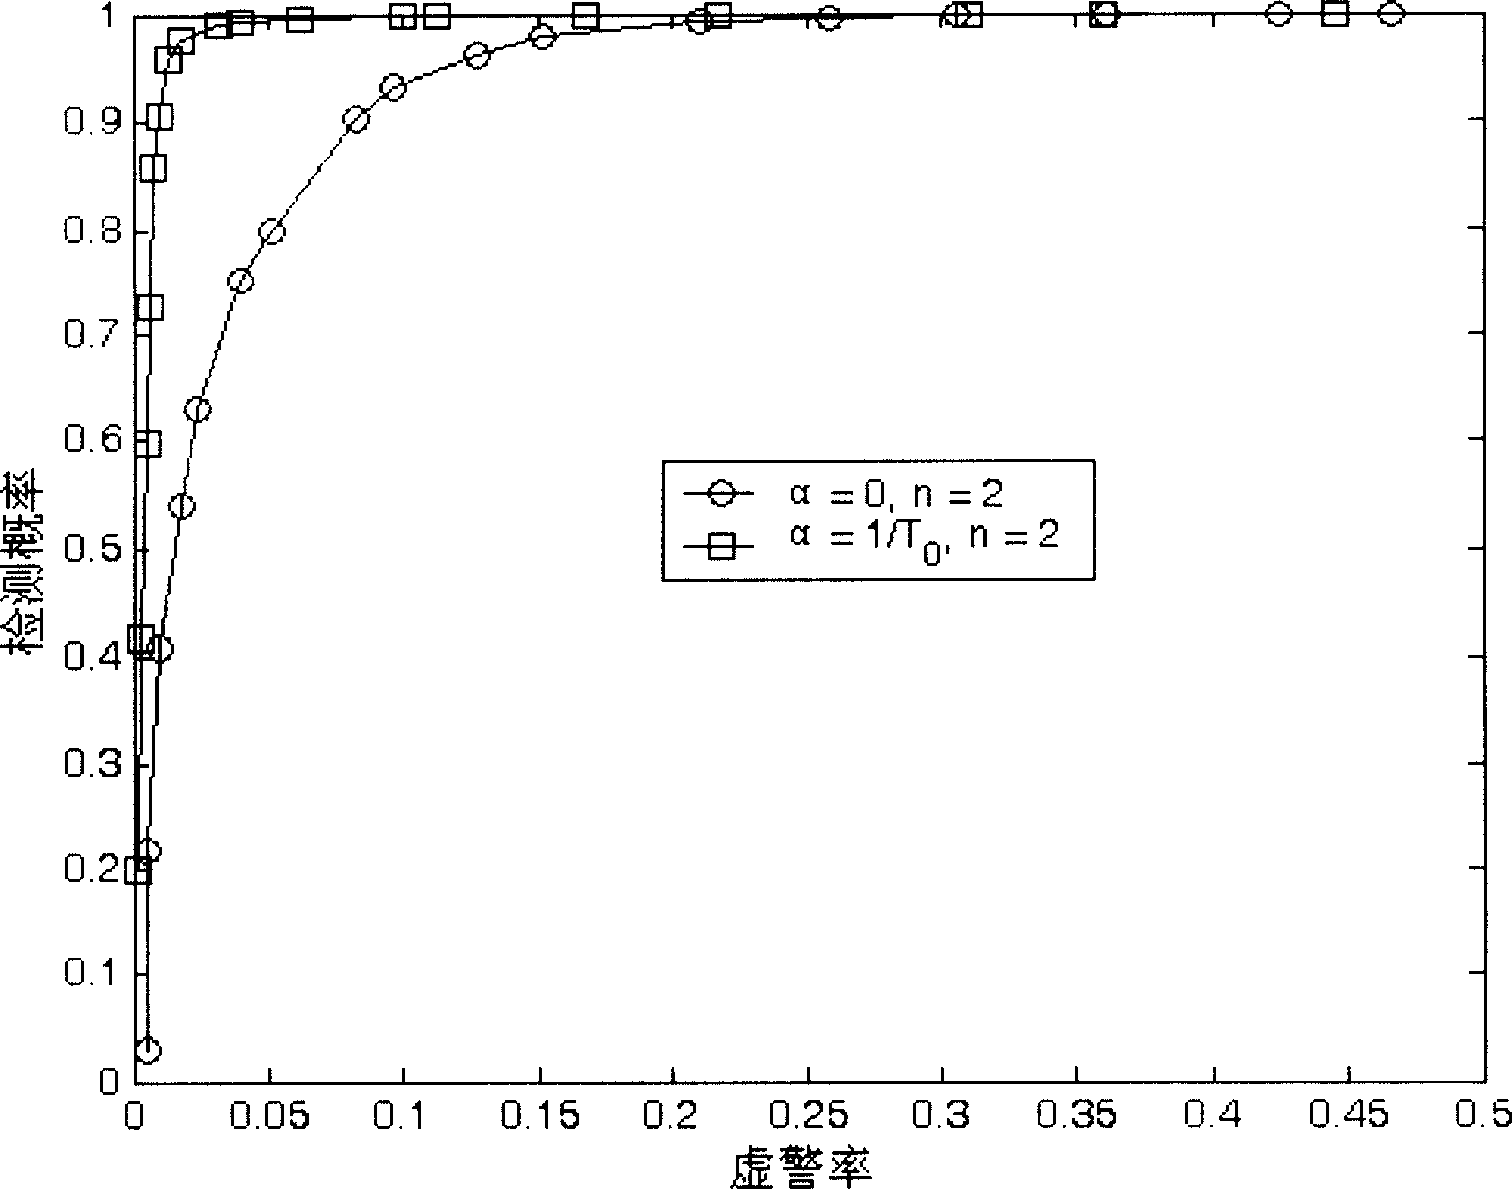 Method of main user's frequency spectrum hole in use for detecting characteristics of cooperation, and periodic stable state of secondary user in radio communication